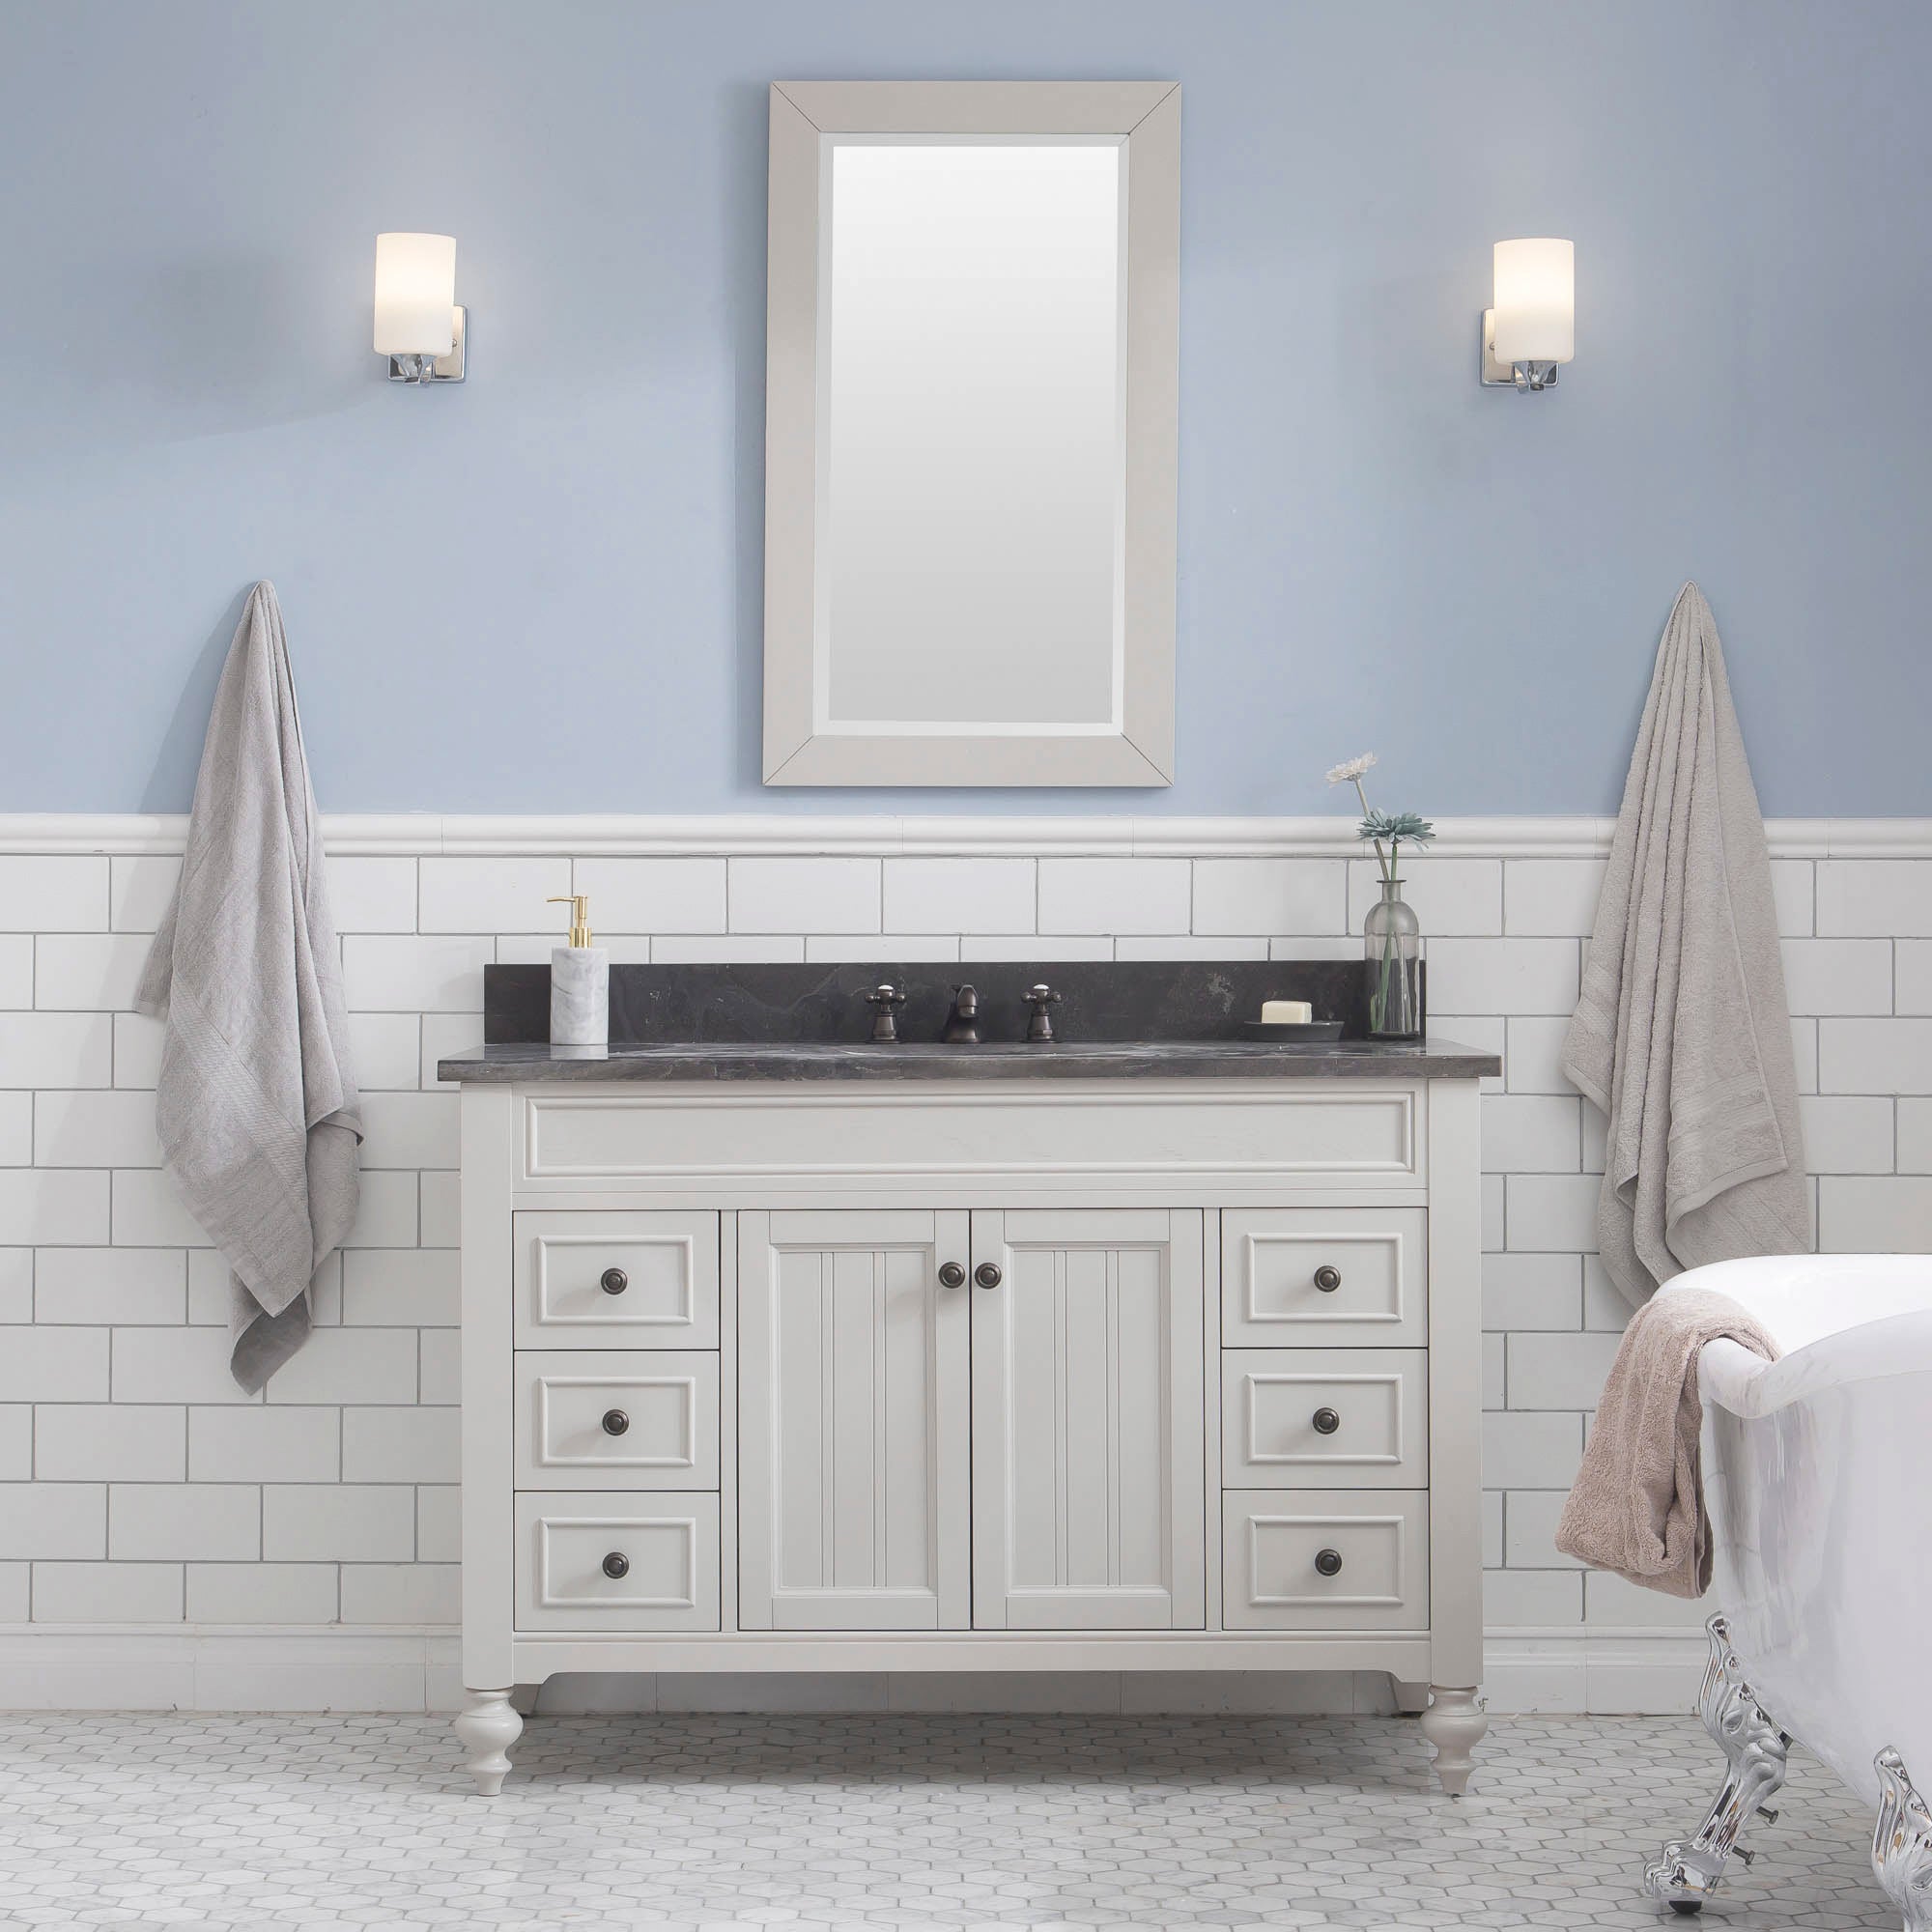 Water Creation | 48 Inch Earl Grey Single Sink Bathroom Vanity With Matching Framed Mirror From The Potenza Collection | PO48BL03EG-R24000000